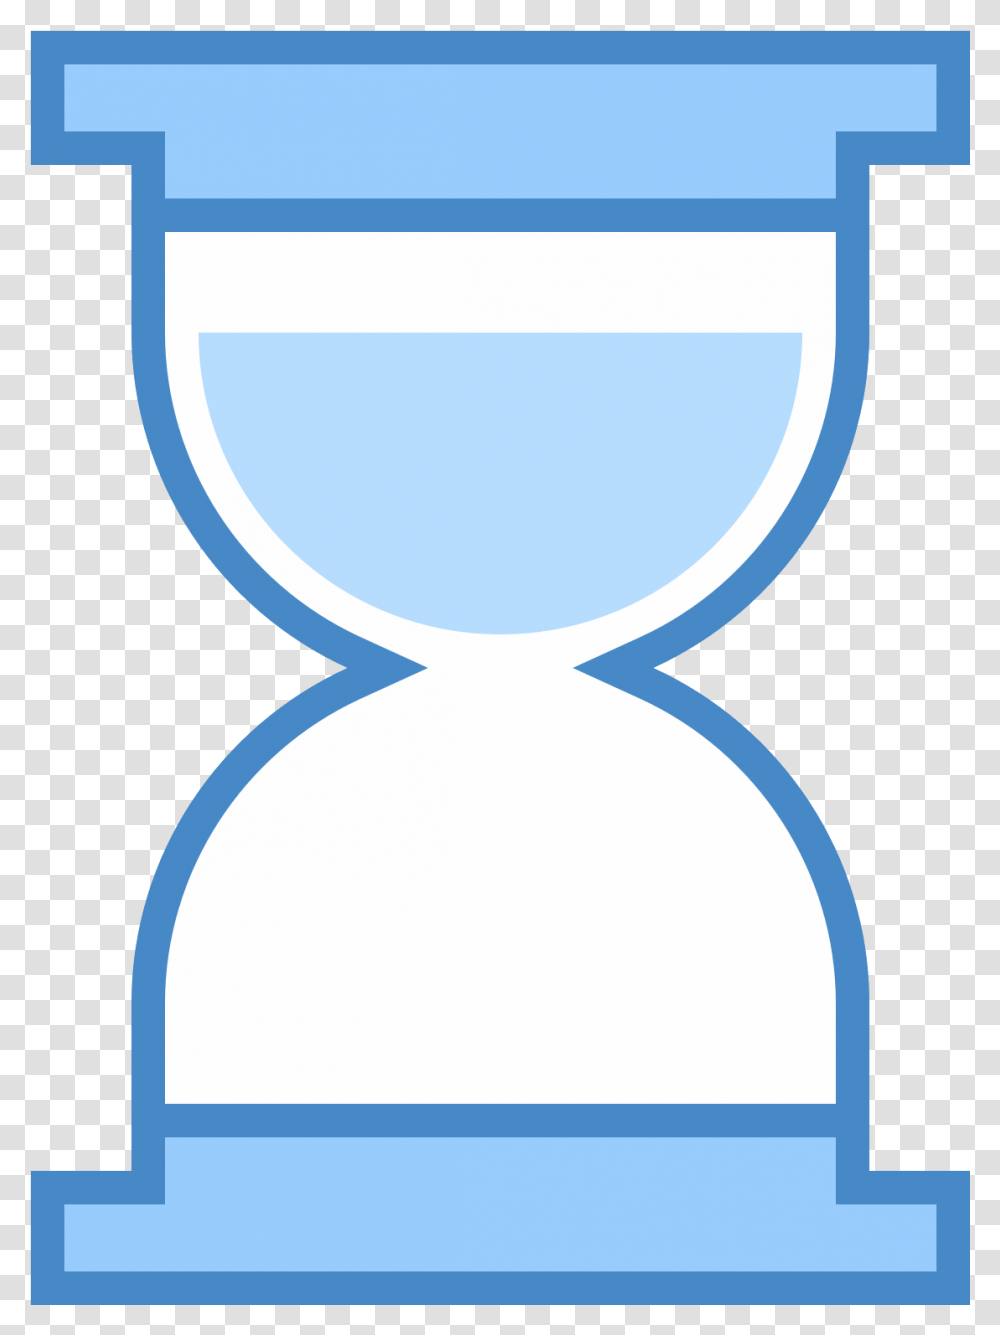 Hourglass Icon Sand Watch Icon Windows 10 Hourglass Transparent Png